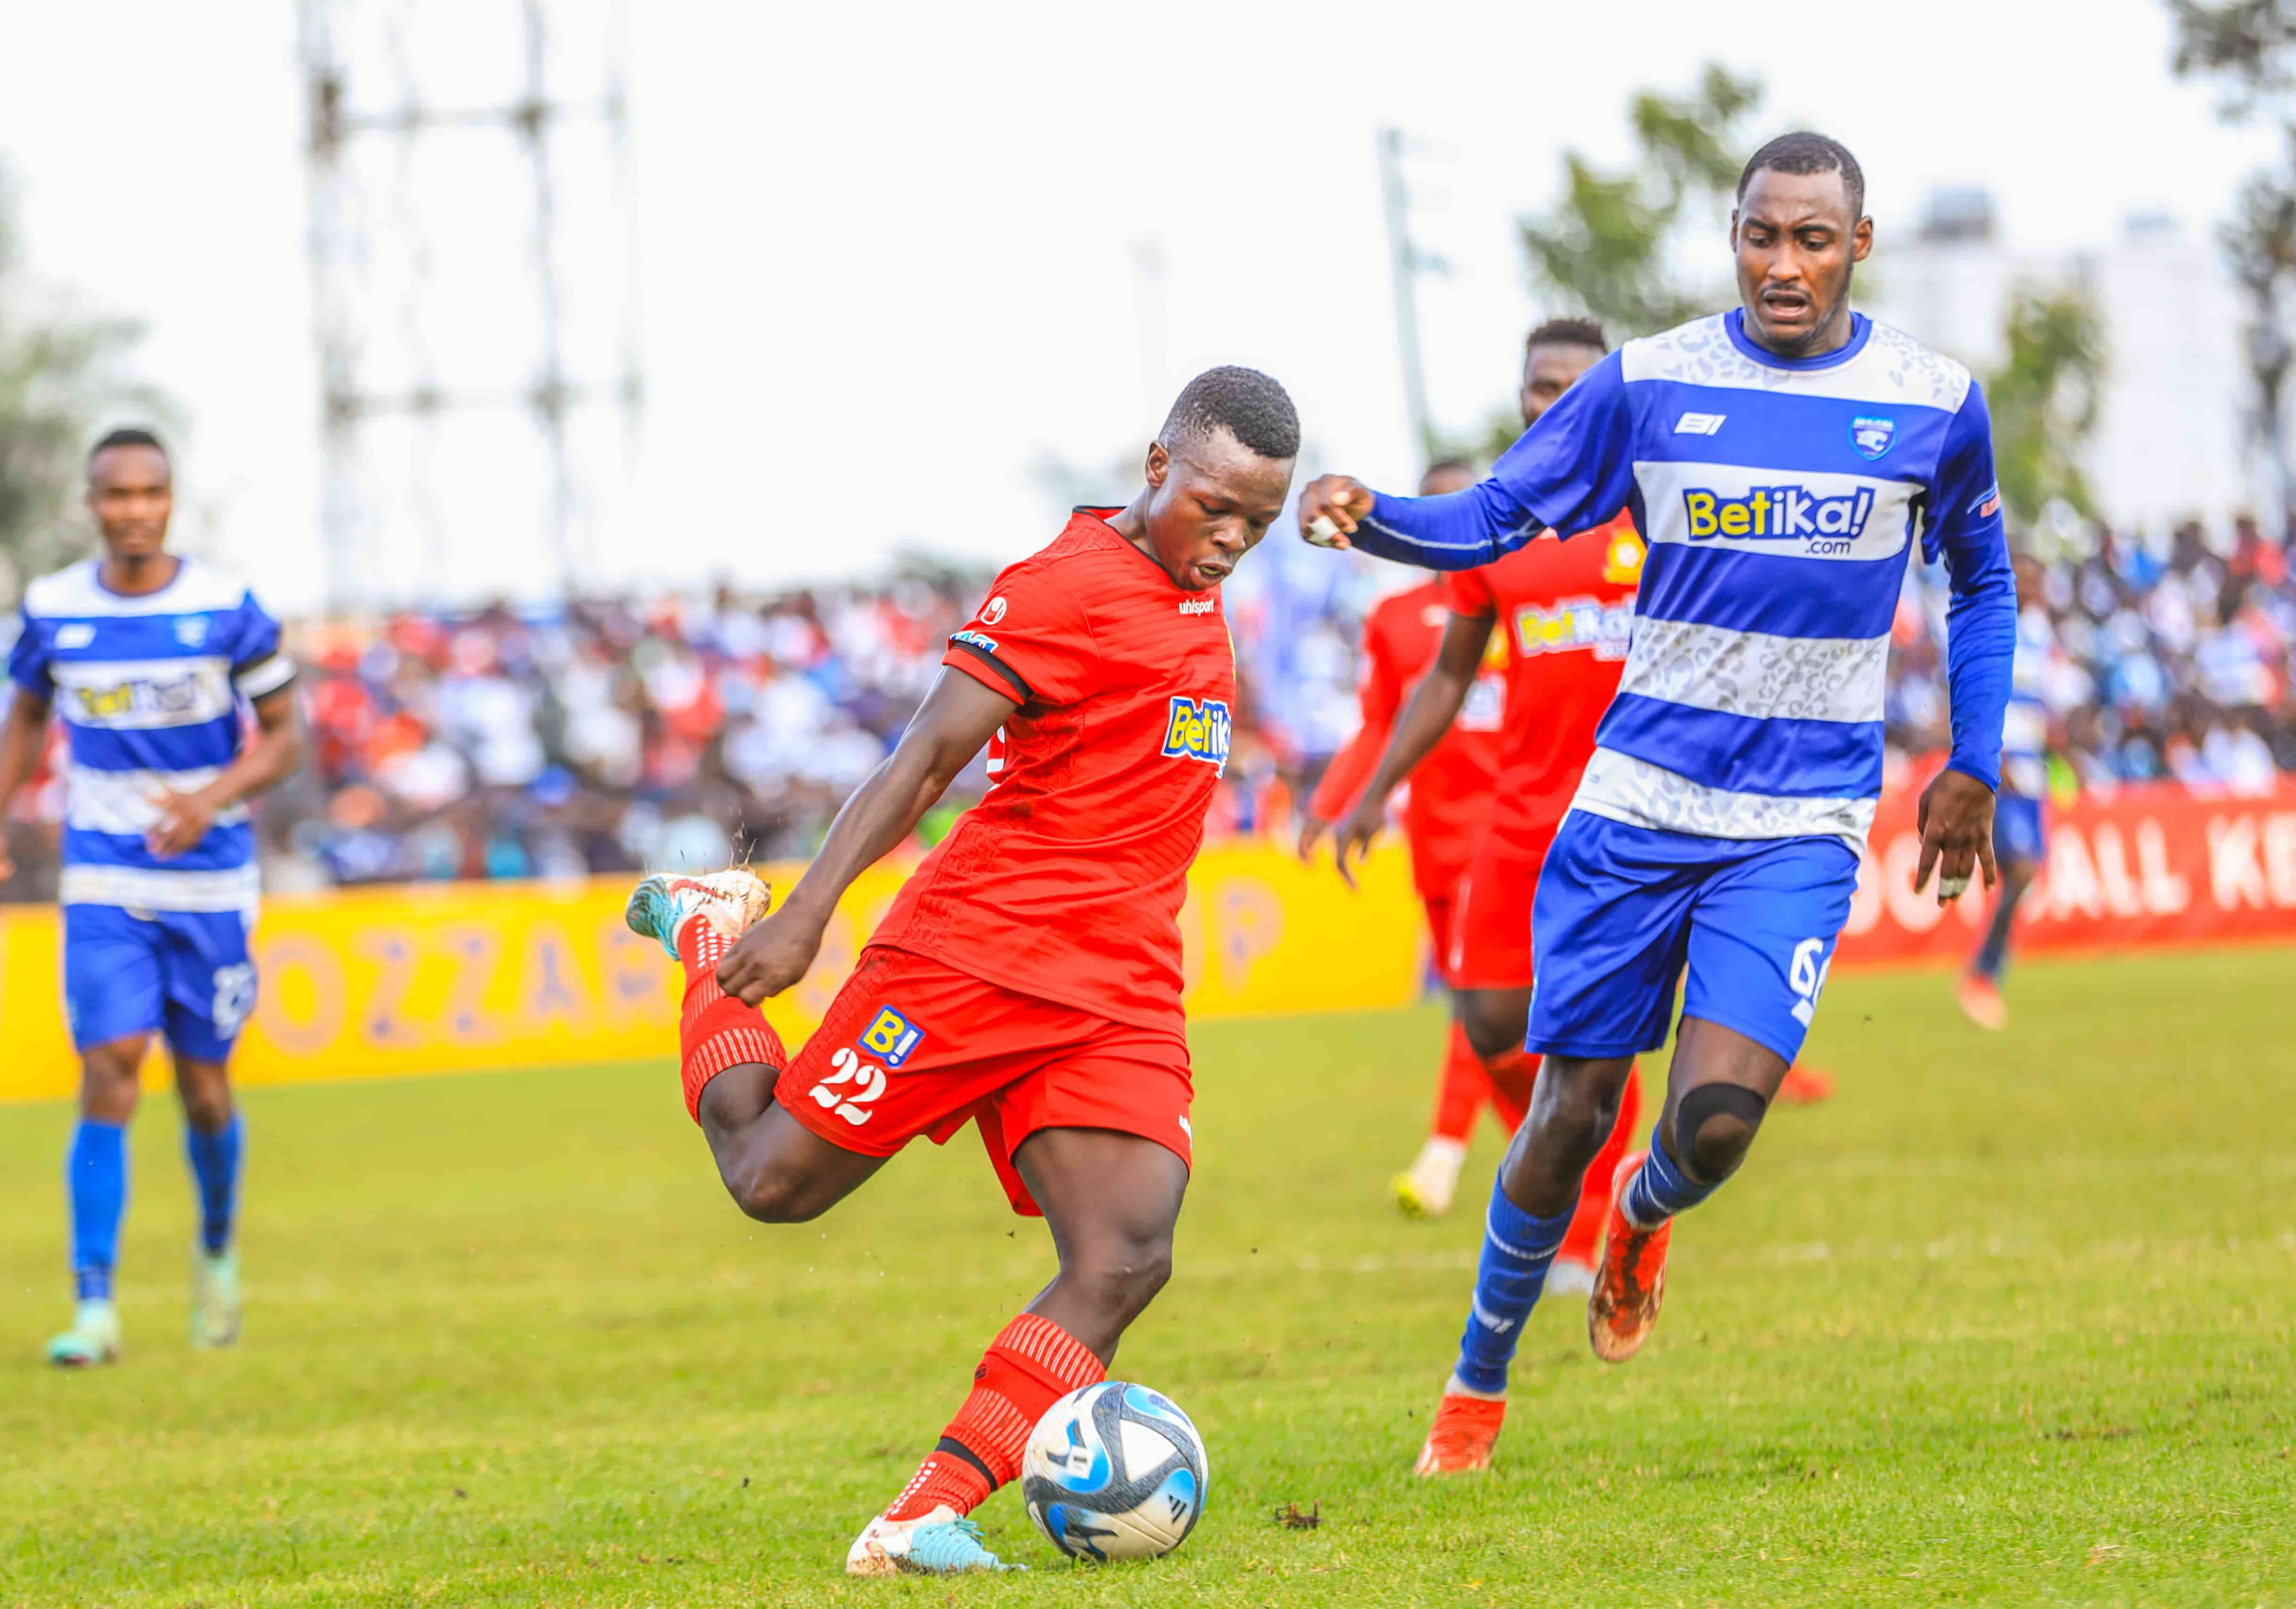 KCB cruise to FKF finals as Kenya Police-AFC Leopards is abandoned due to crowd trouble